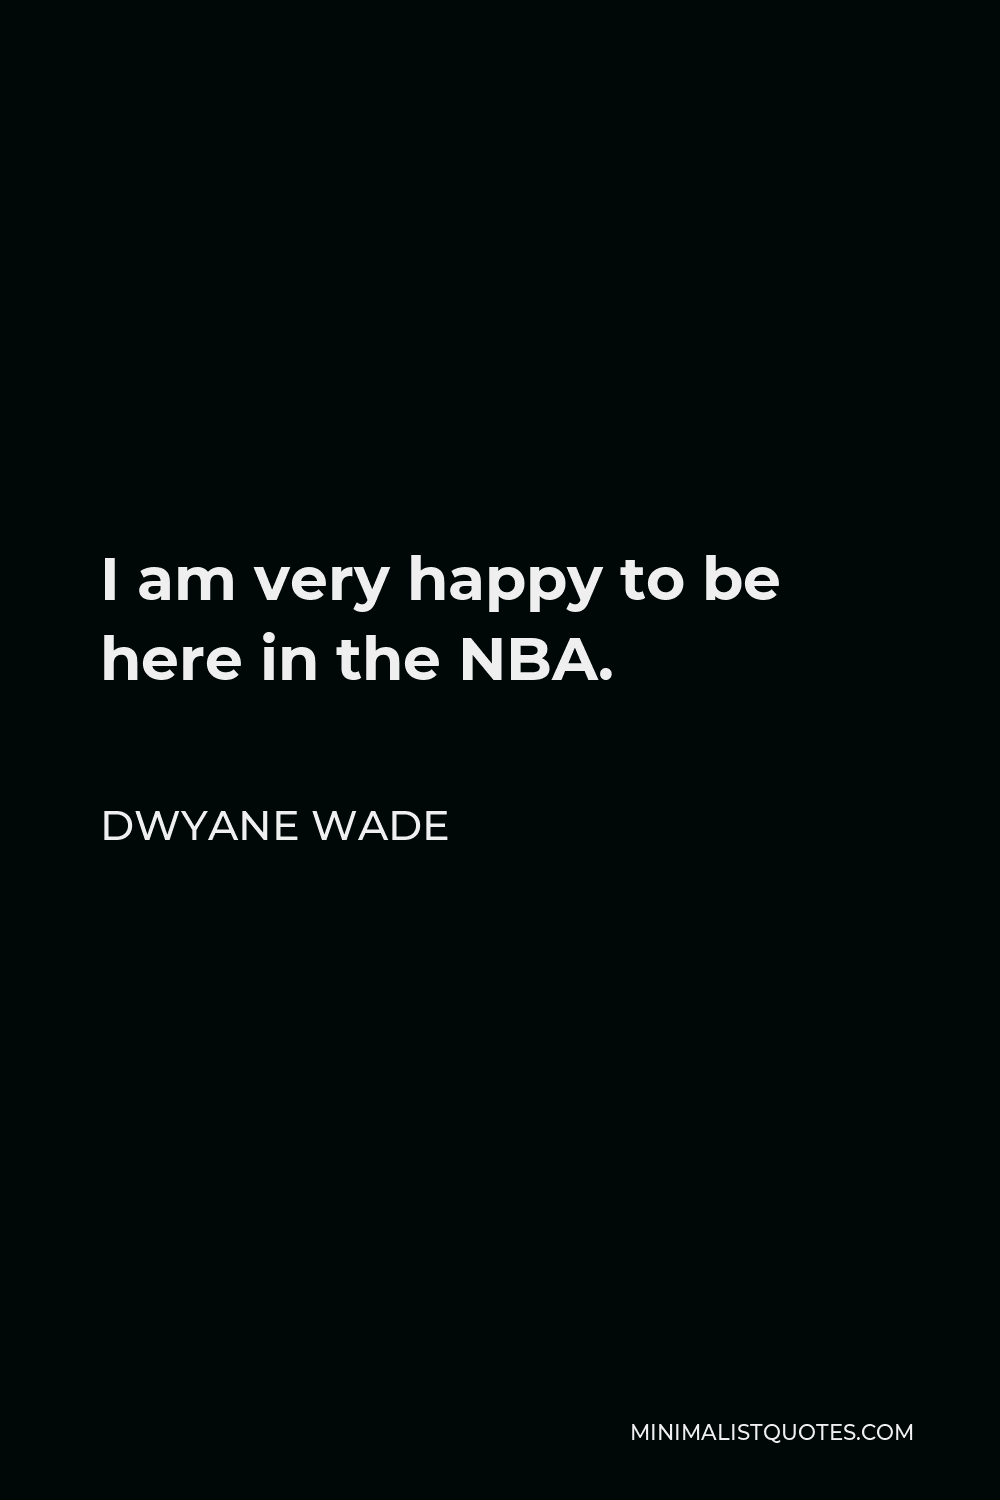 Dwyane Wade Quote - I am very happy to be here in the NBA.